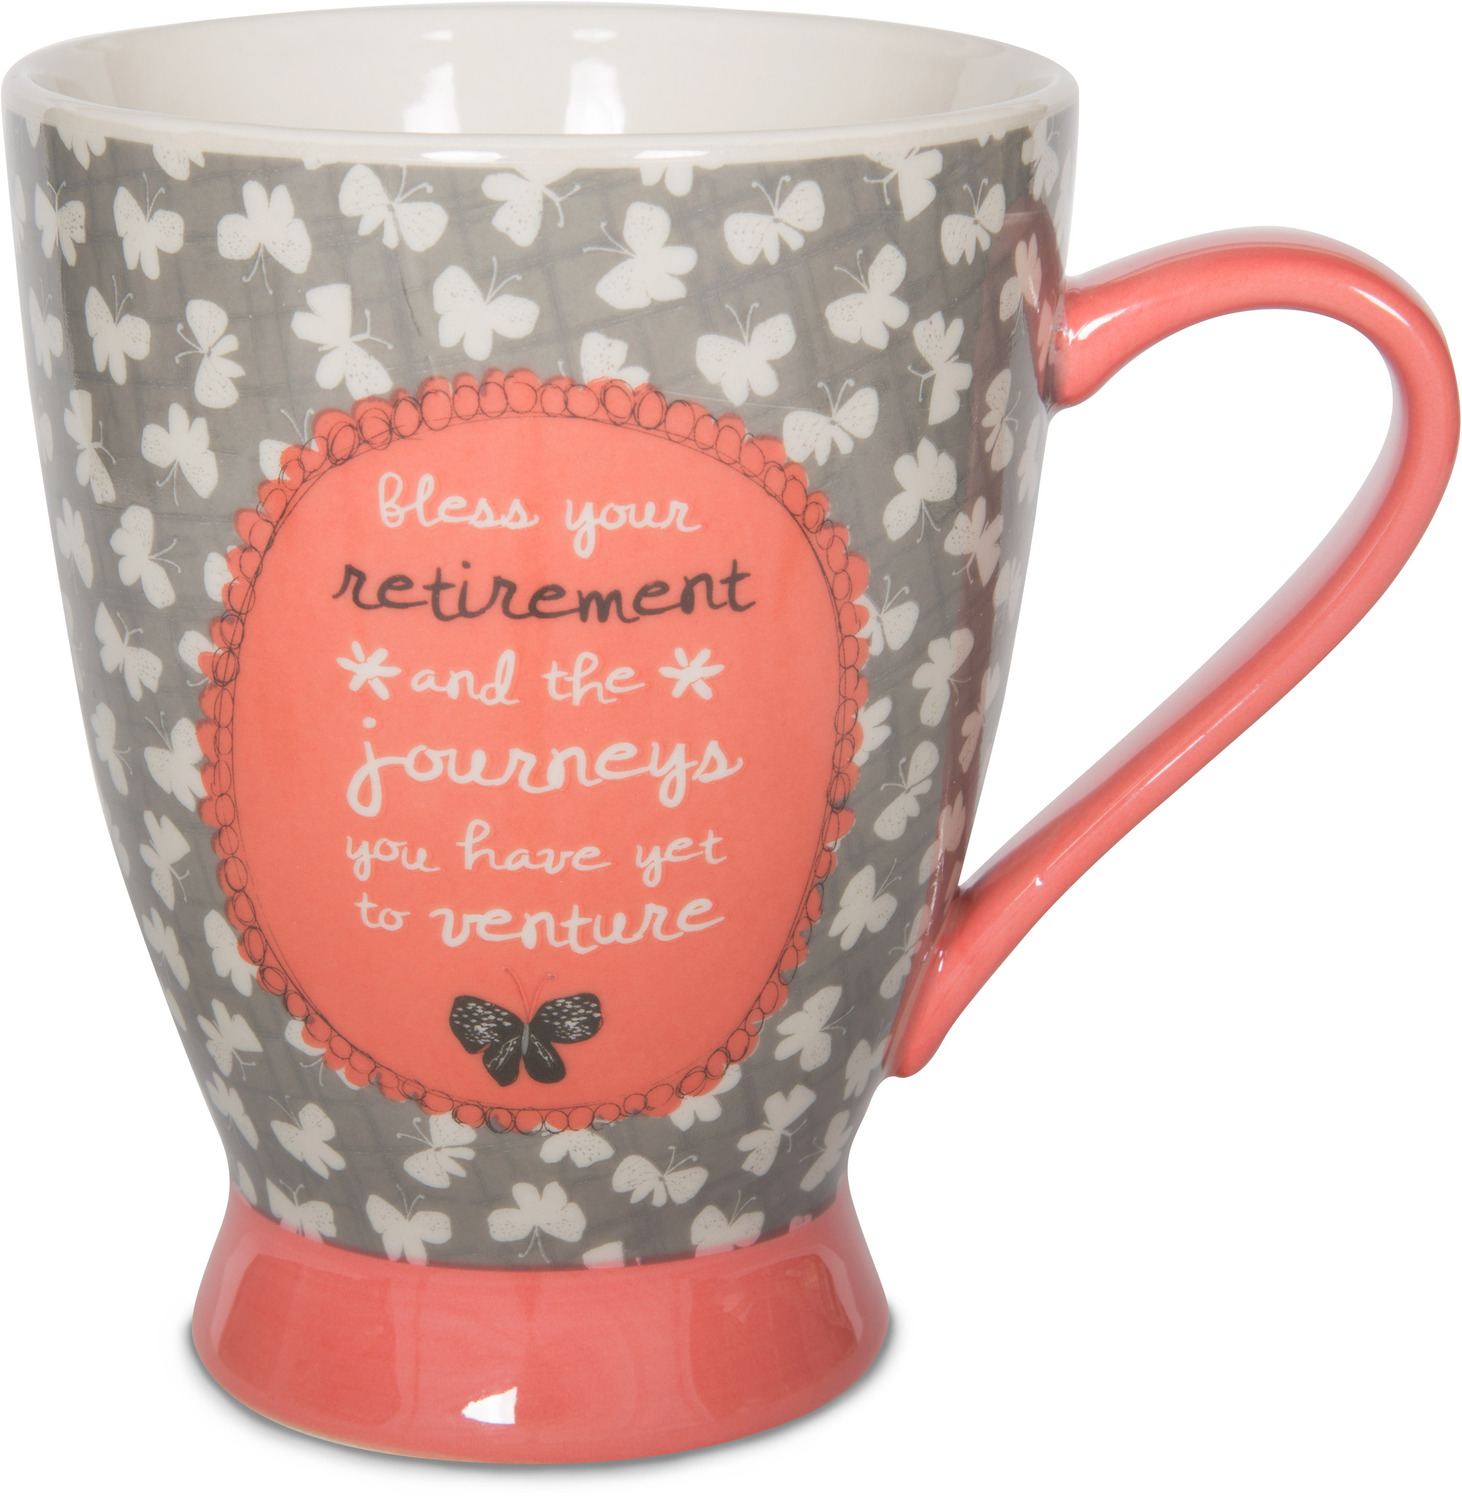 Retirement by Bloom by Amylee Weeks - Retirement - 18 oz Butterfly Mug